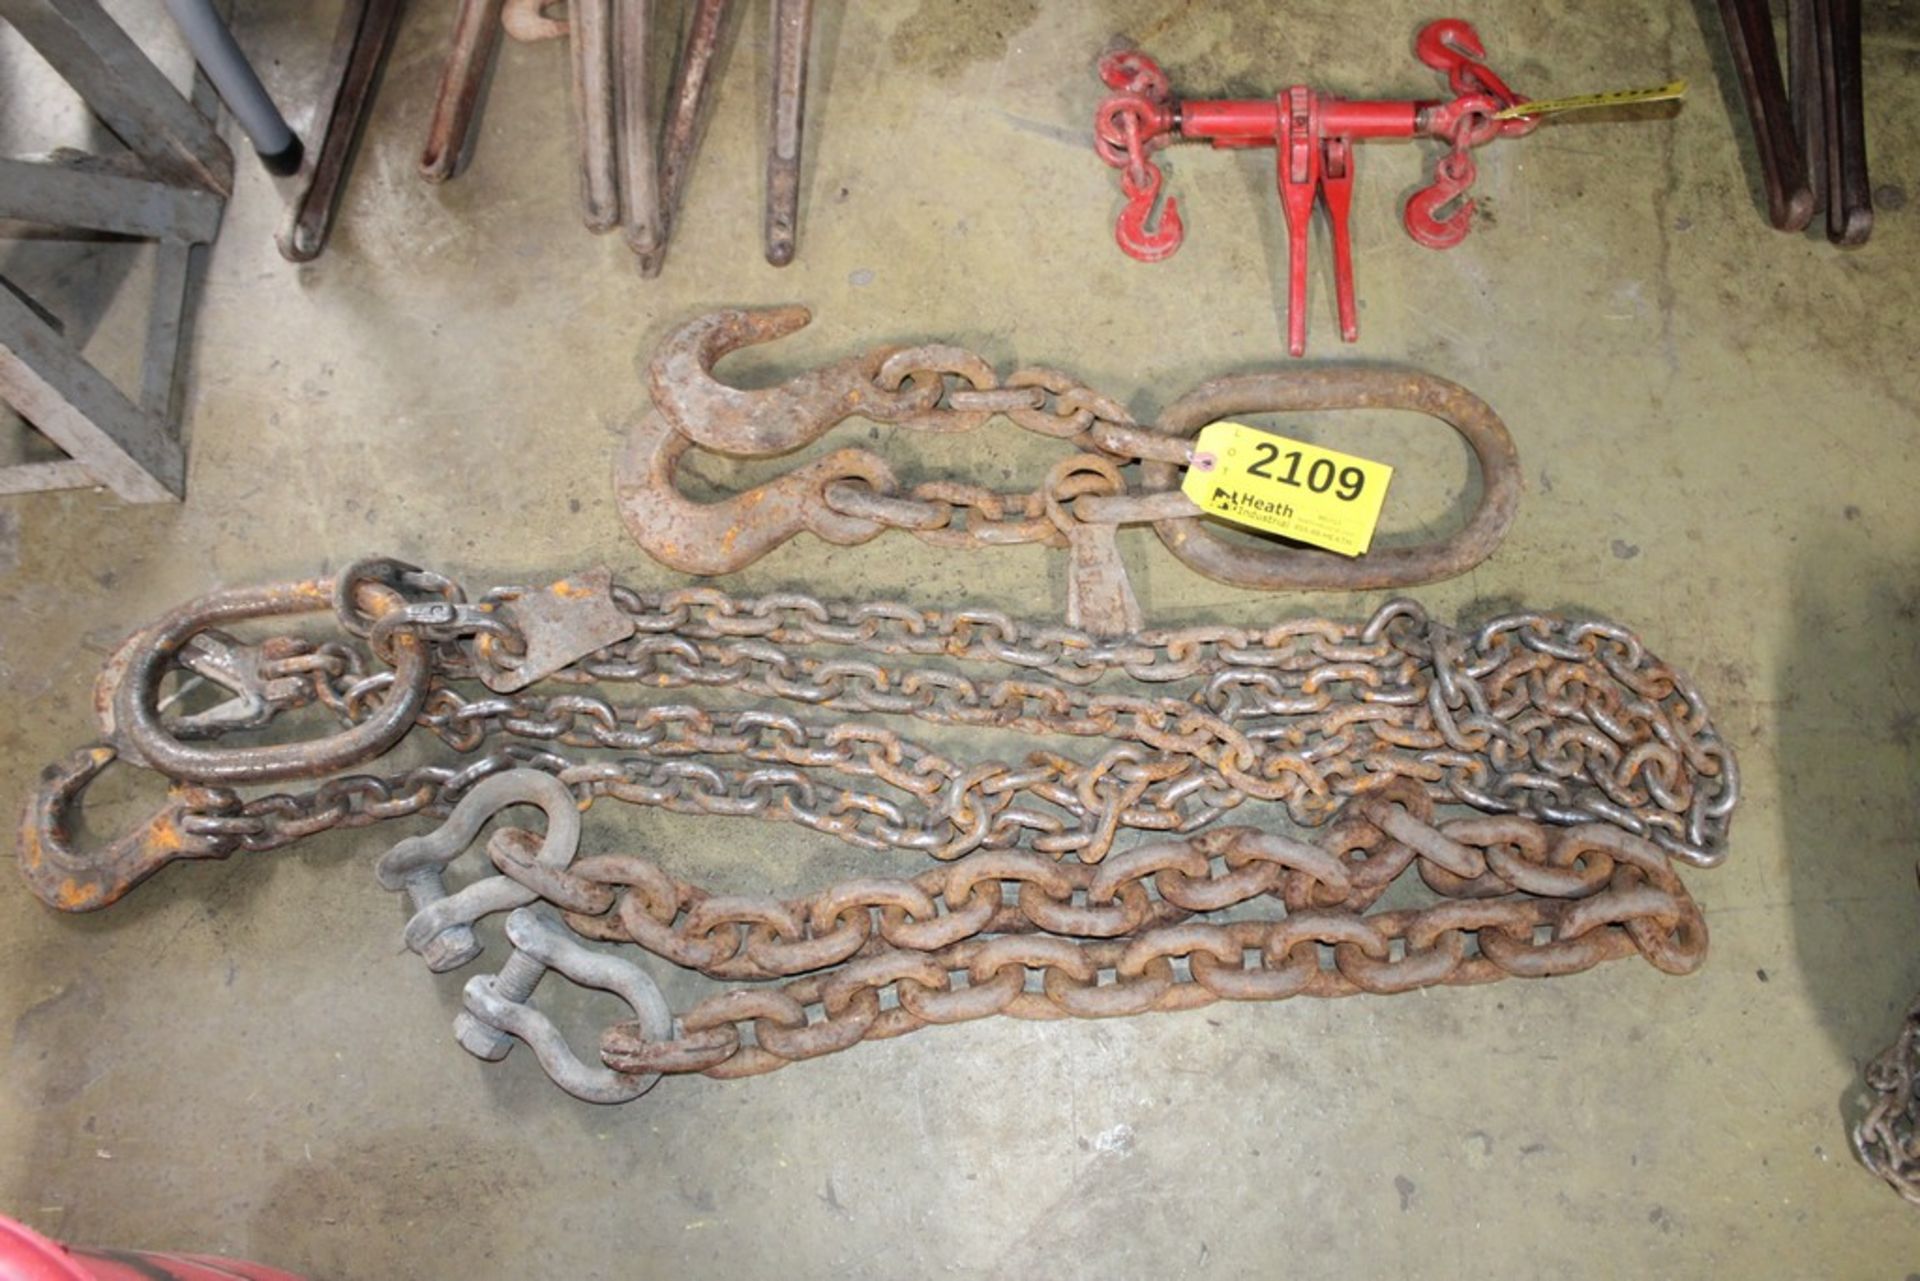 (2) TWO LEG LIFTING CHAINS, CHAIN WITH (2) SHACKLES